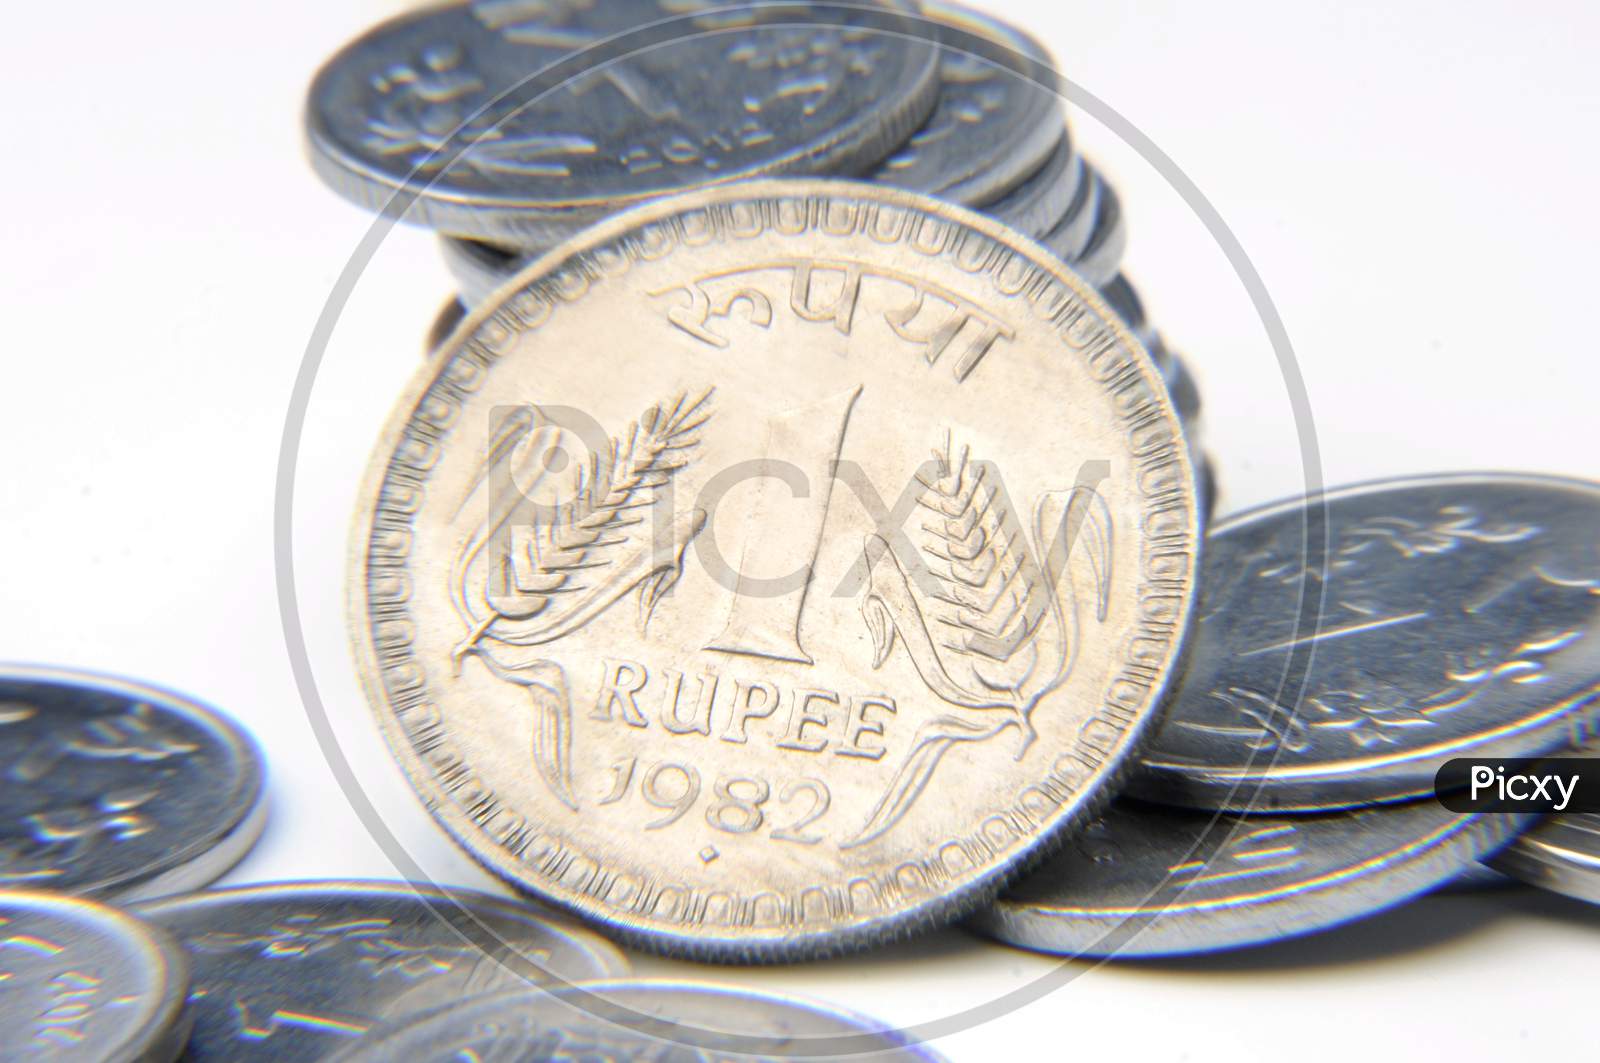 One Rupee Indian Coin, Indian Currency,Rupee Indian Currency,Money Concept.